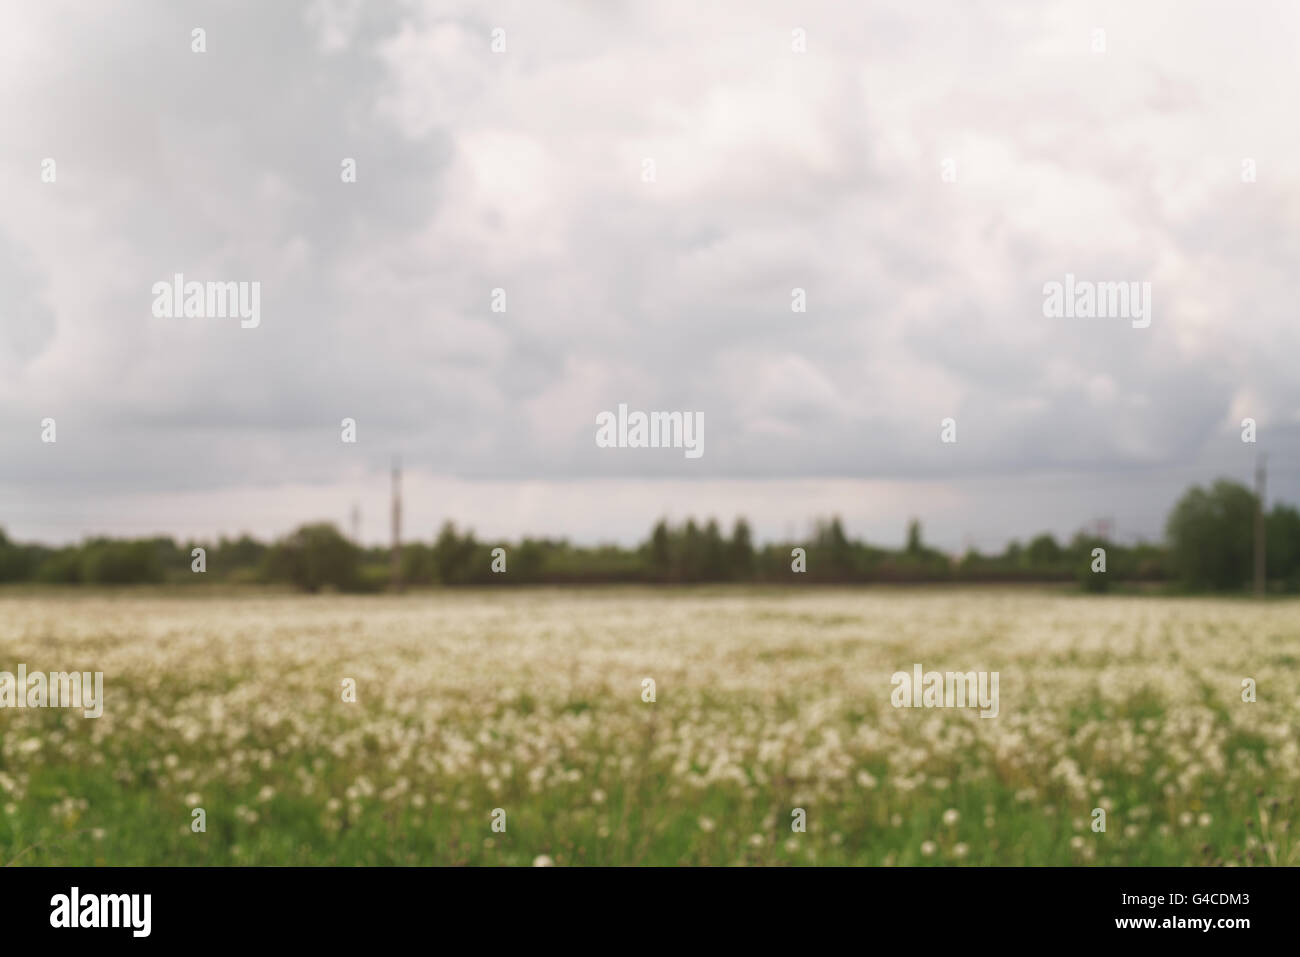 blurred background of rural field Stock Photo